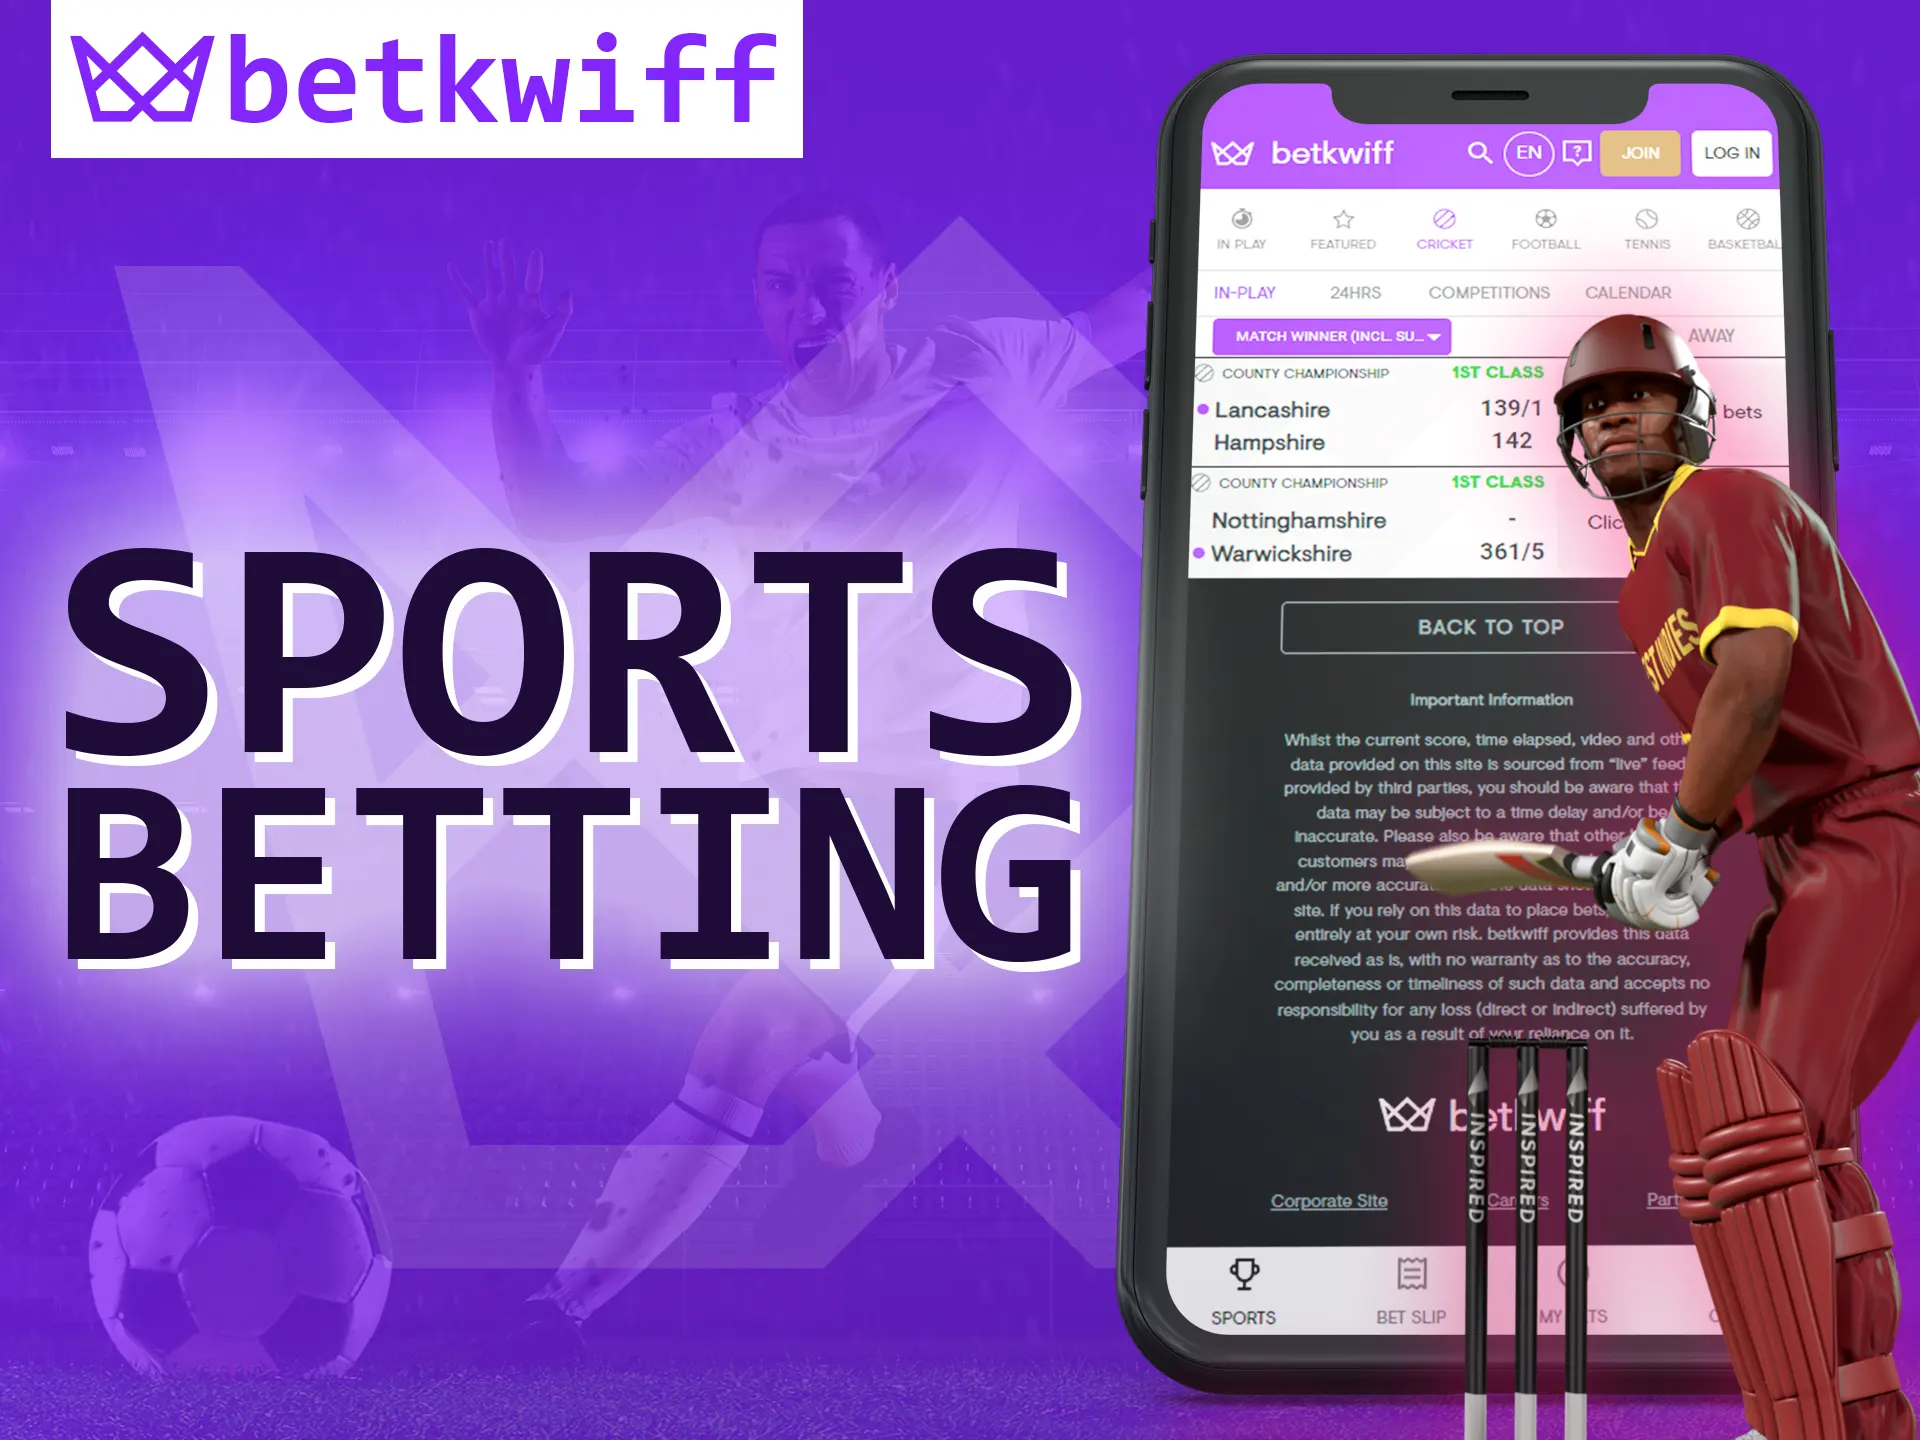 With the Betkwiff app you can bet on any sport.